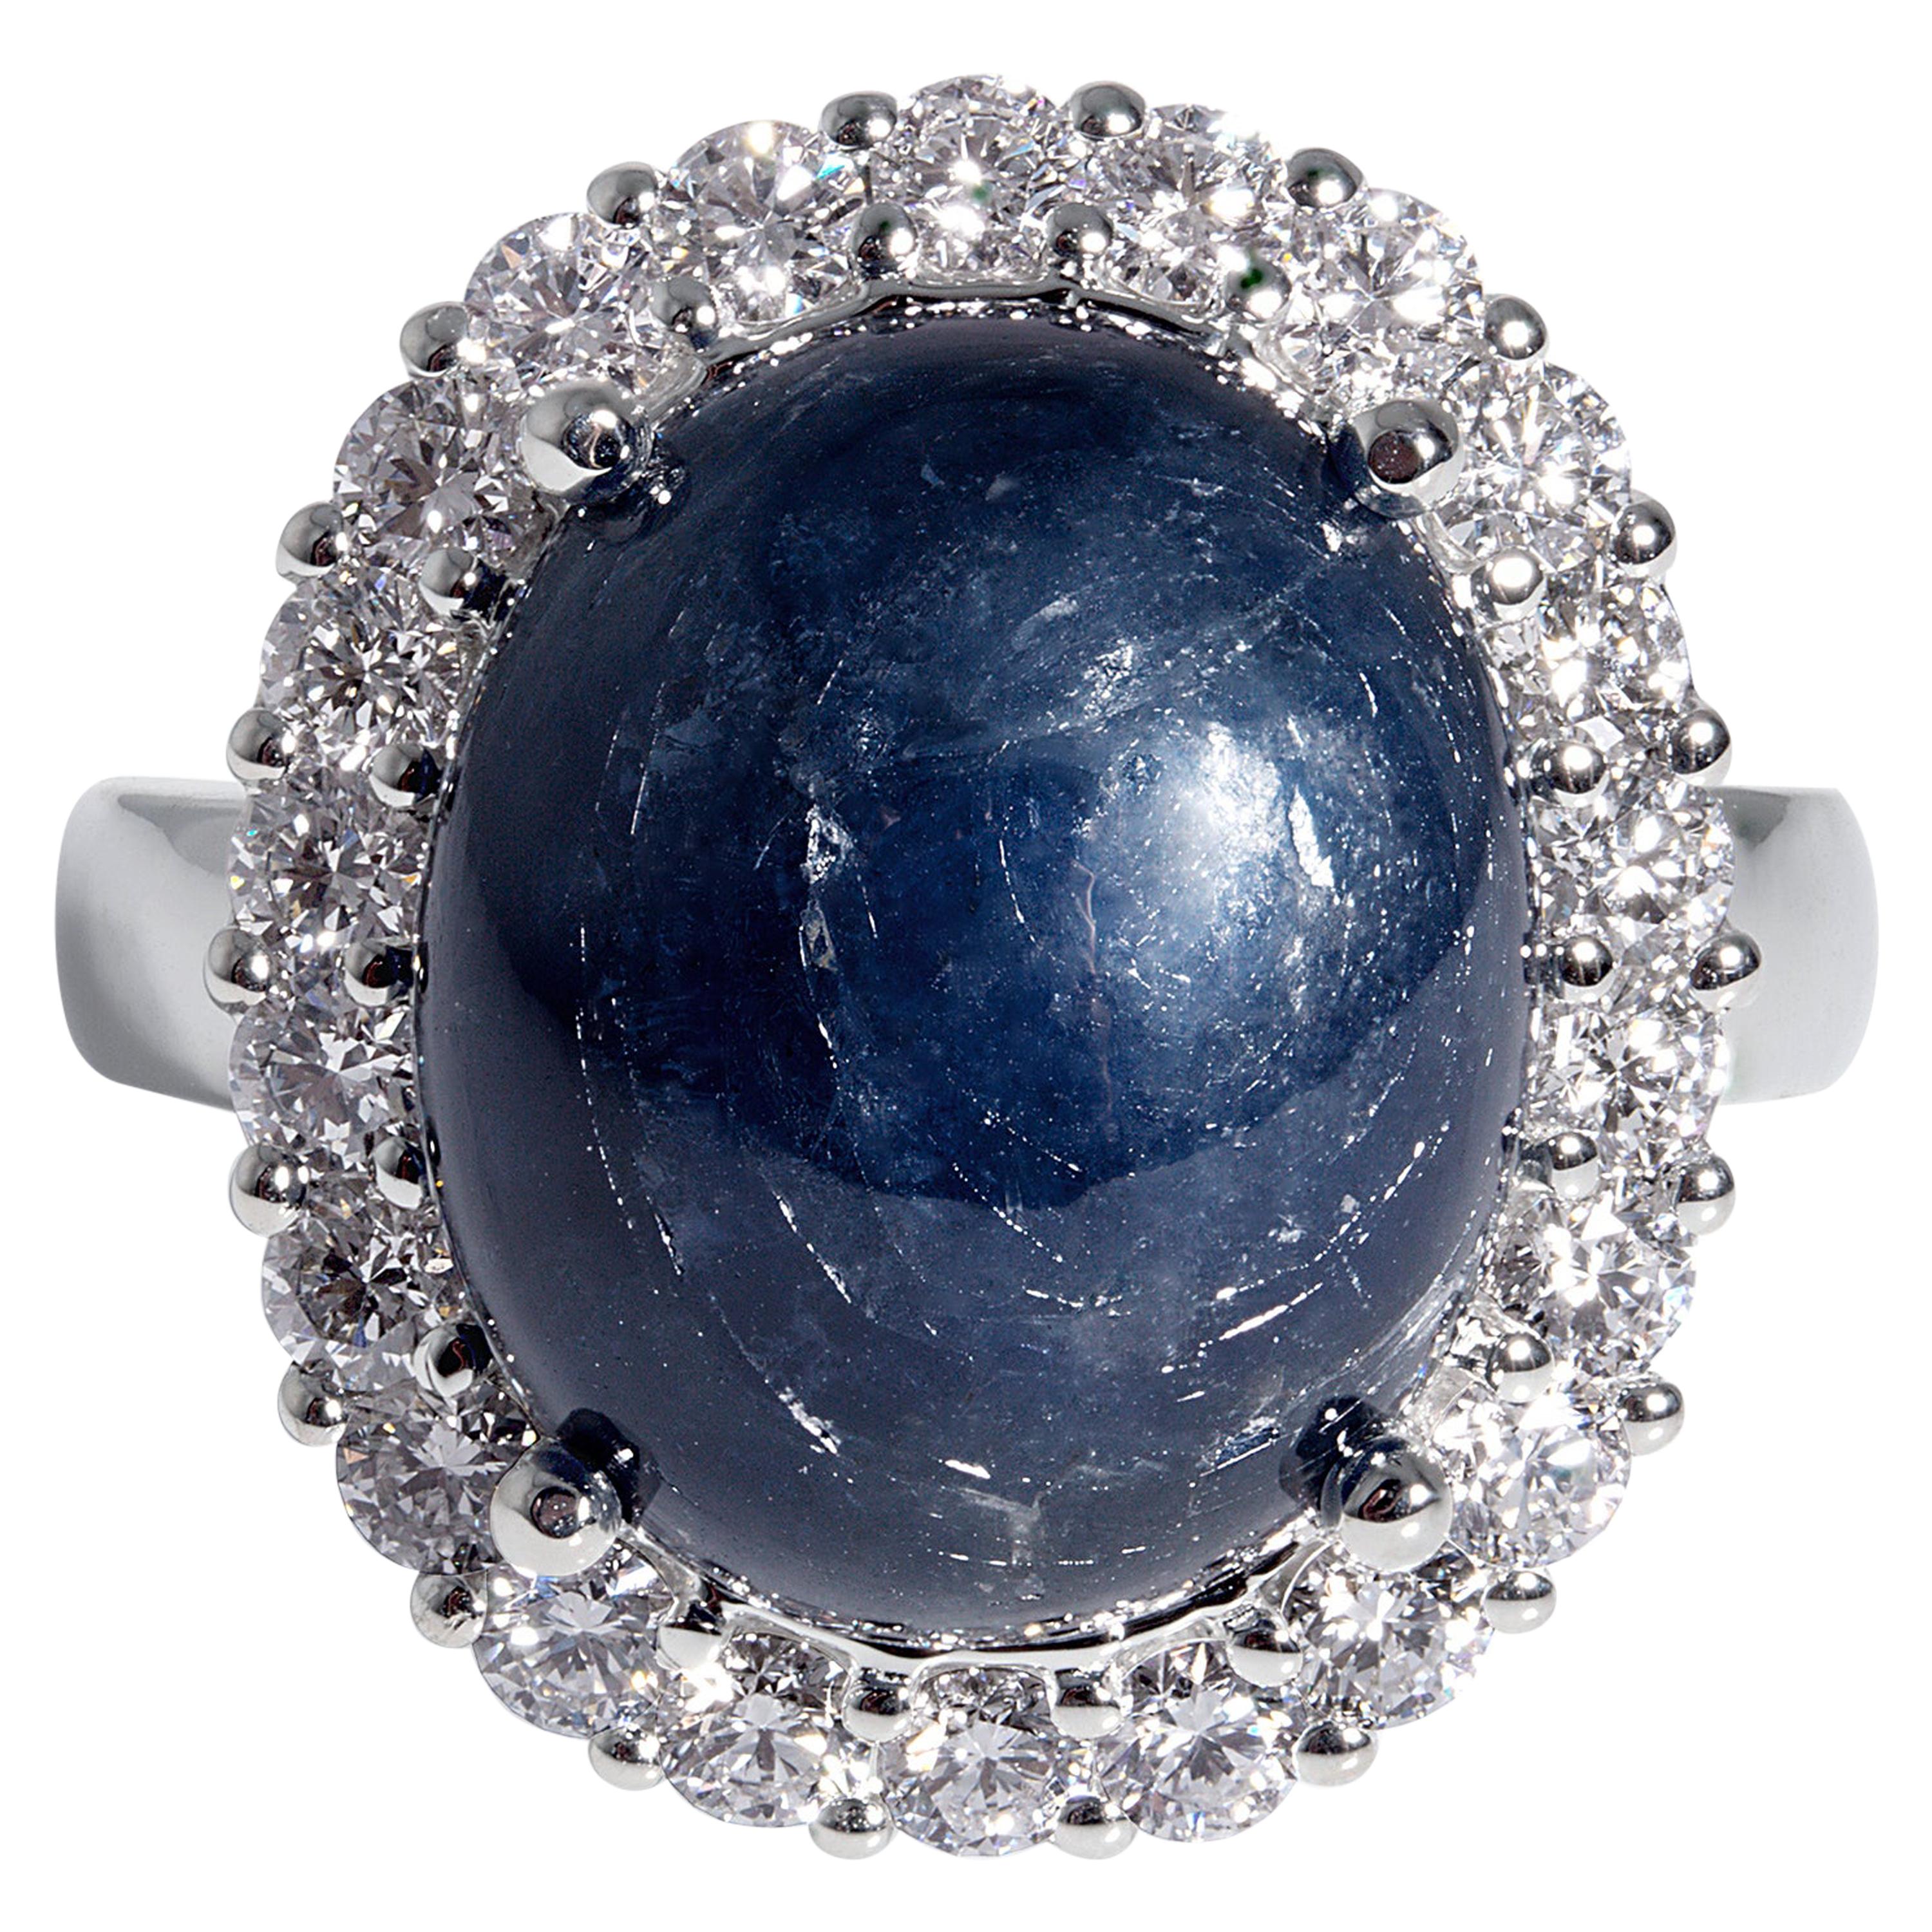 Estate Vintage GIA 15.27ct Cabochon Blue Sapphire Diamonds Cluster Ring in 14k White Gold.

An Iconic Style GIA certified Blue Cabochon Sapphire surrounded by sparkling round diamonds Ring. A wonderful Vintage Estate Jewel. 
The impressive Midnight